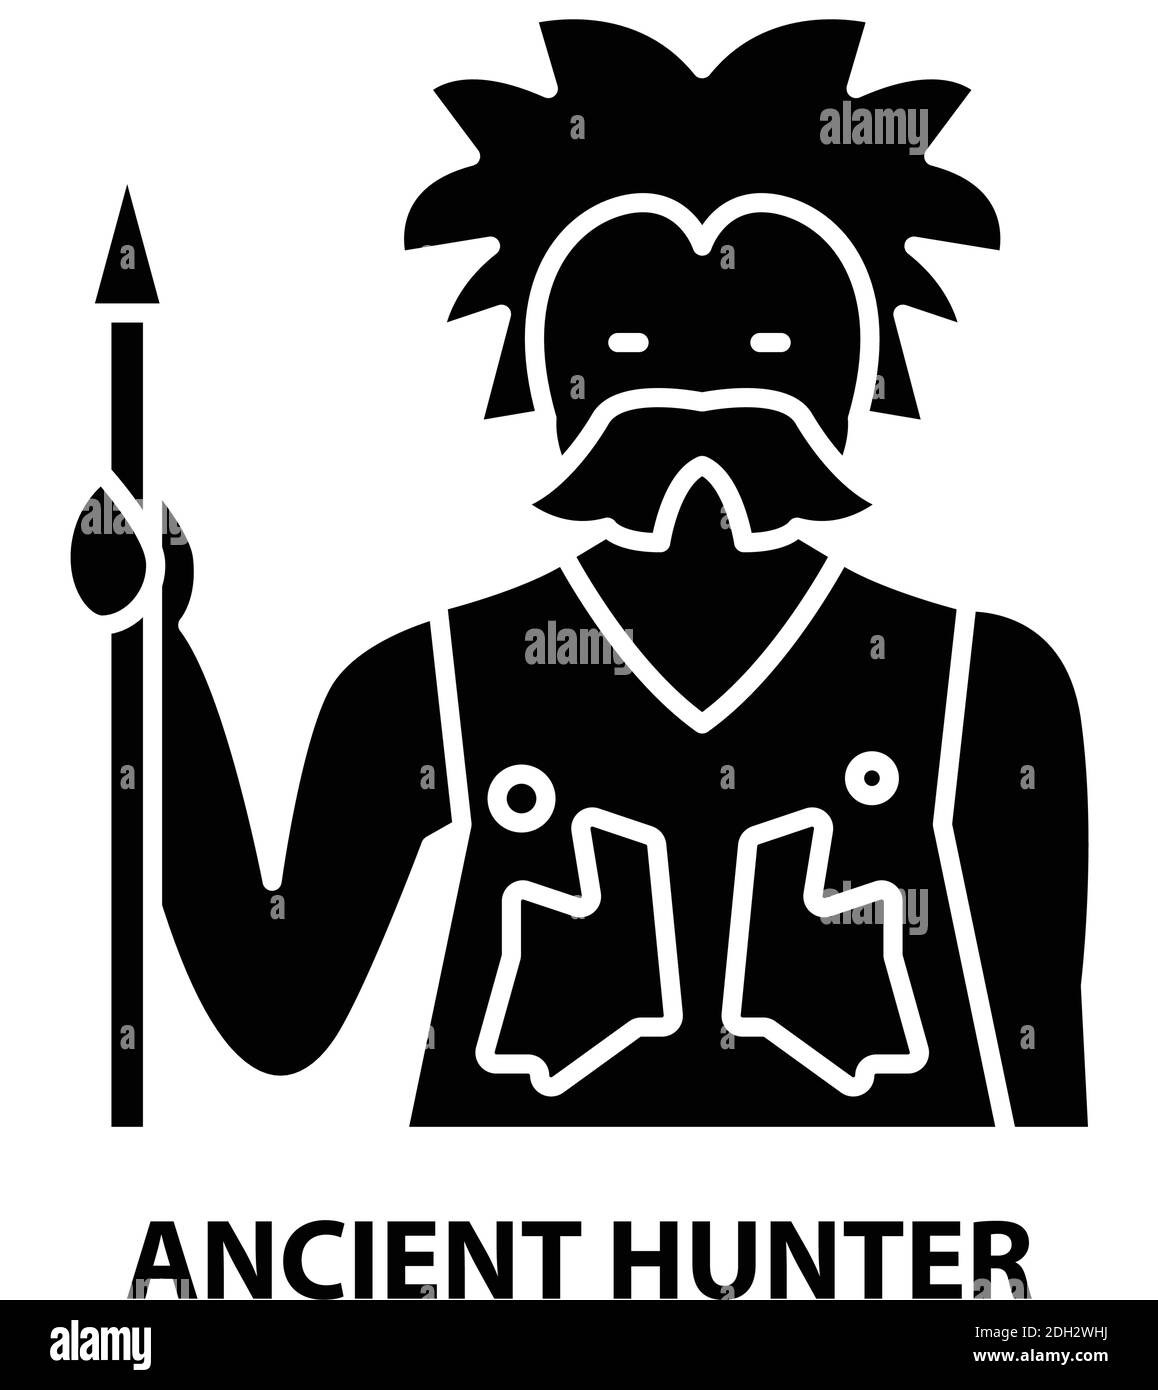 ancient hunter icon, black vector sign with editable strokes, concept illustration Stock Vector